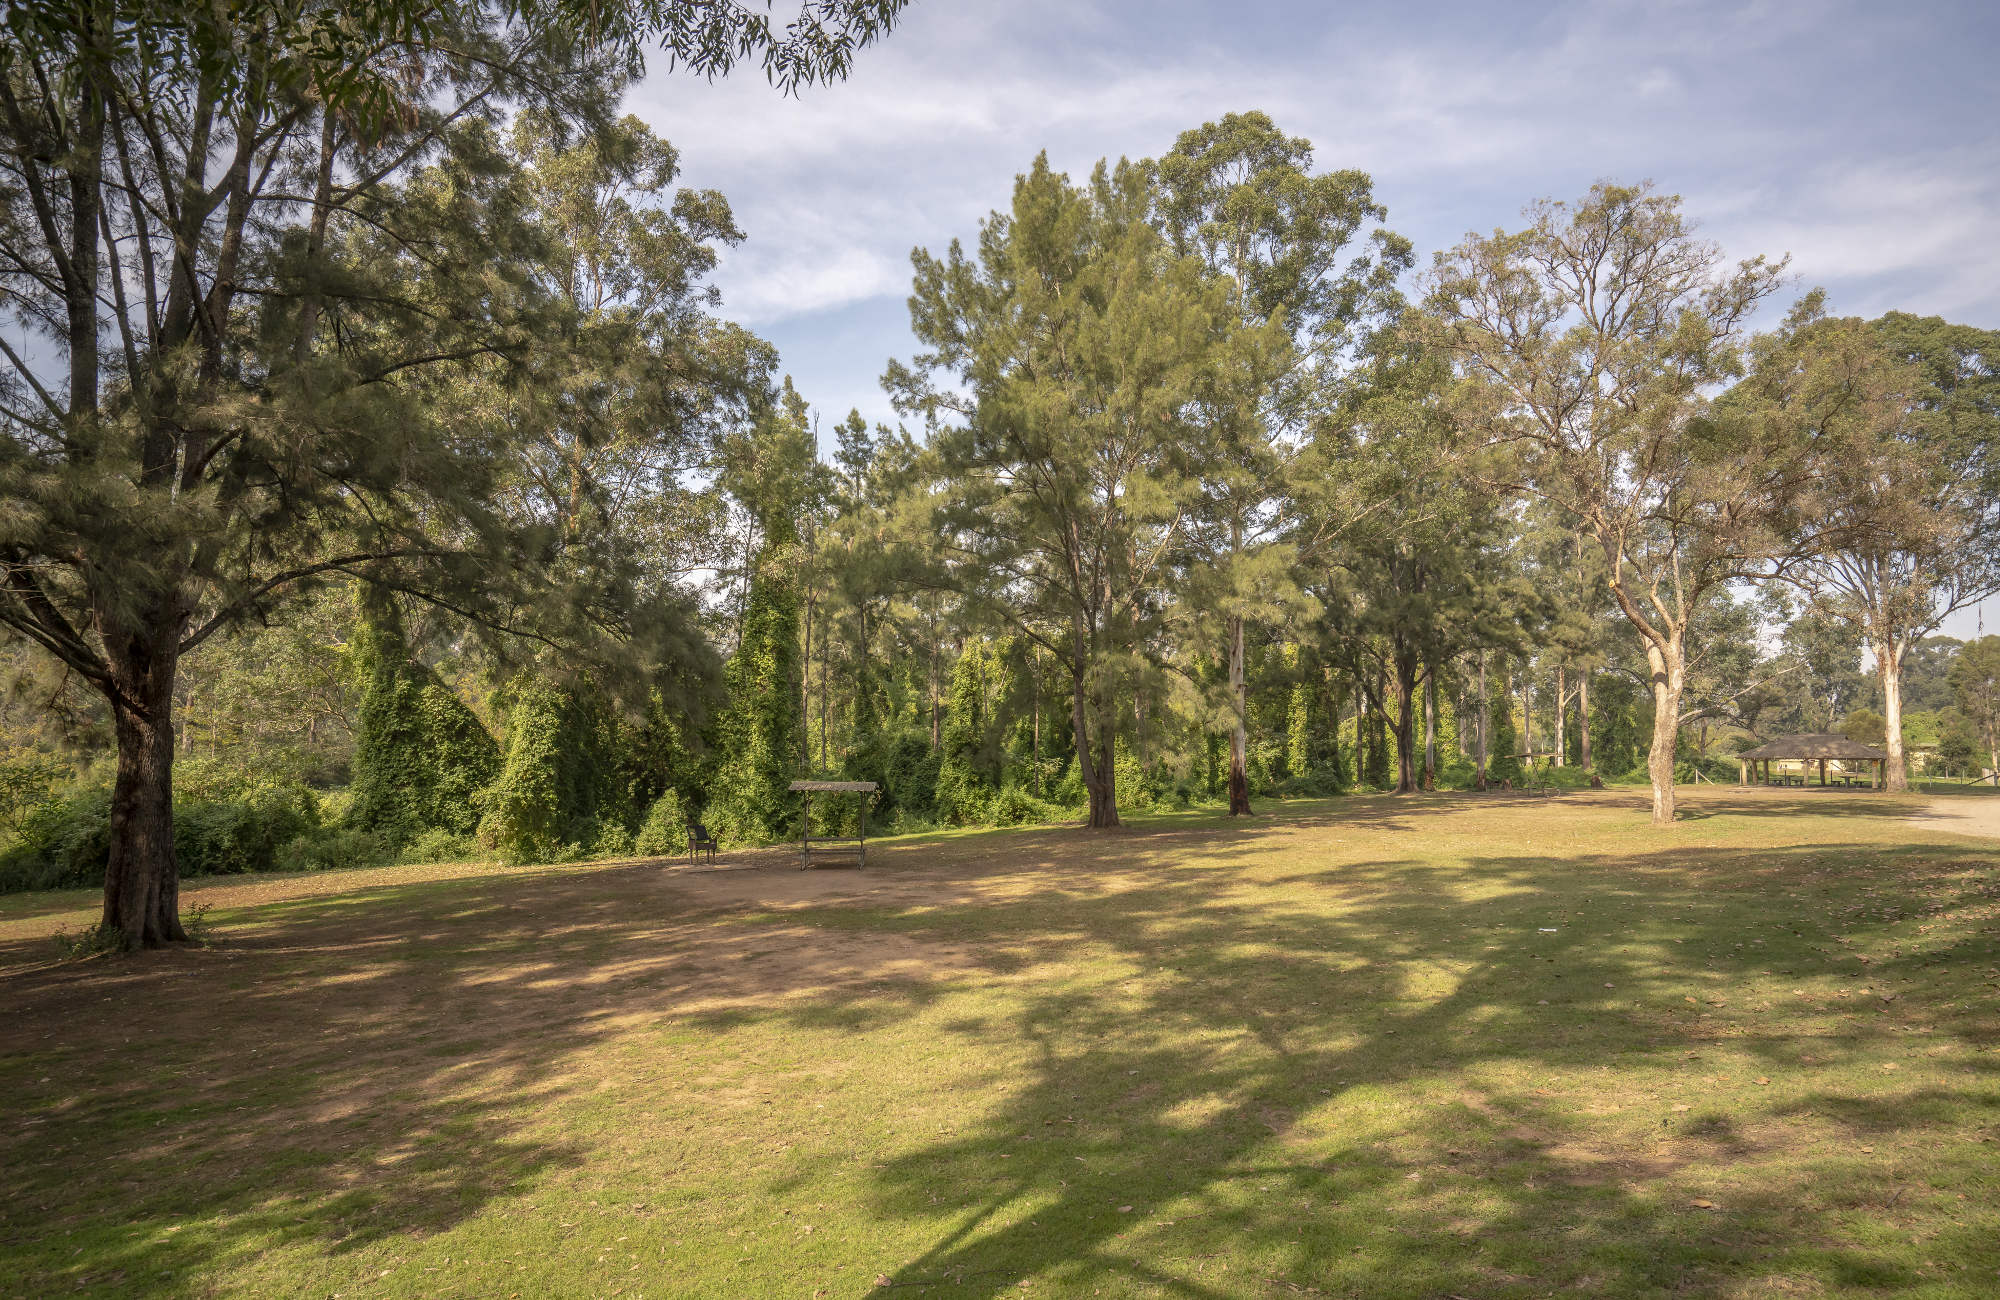 View of the grassy unmarked sites at Cattai campground in Cattai National Park, on the Hawkesbury River. Photo: John Spencer/OEH